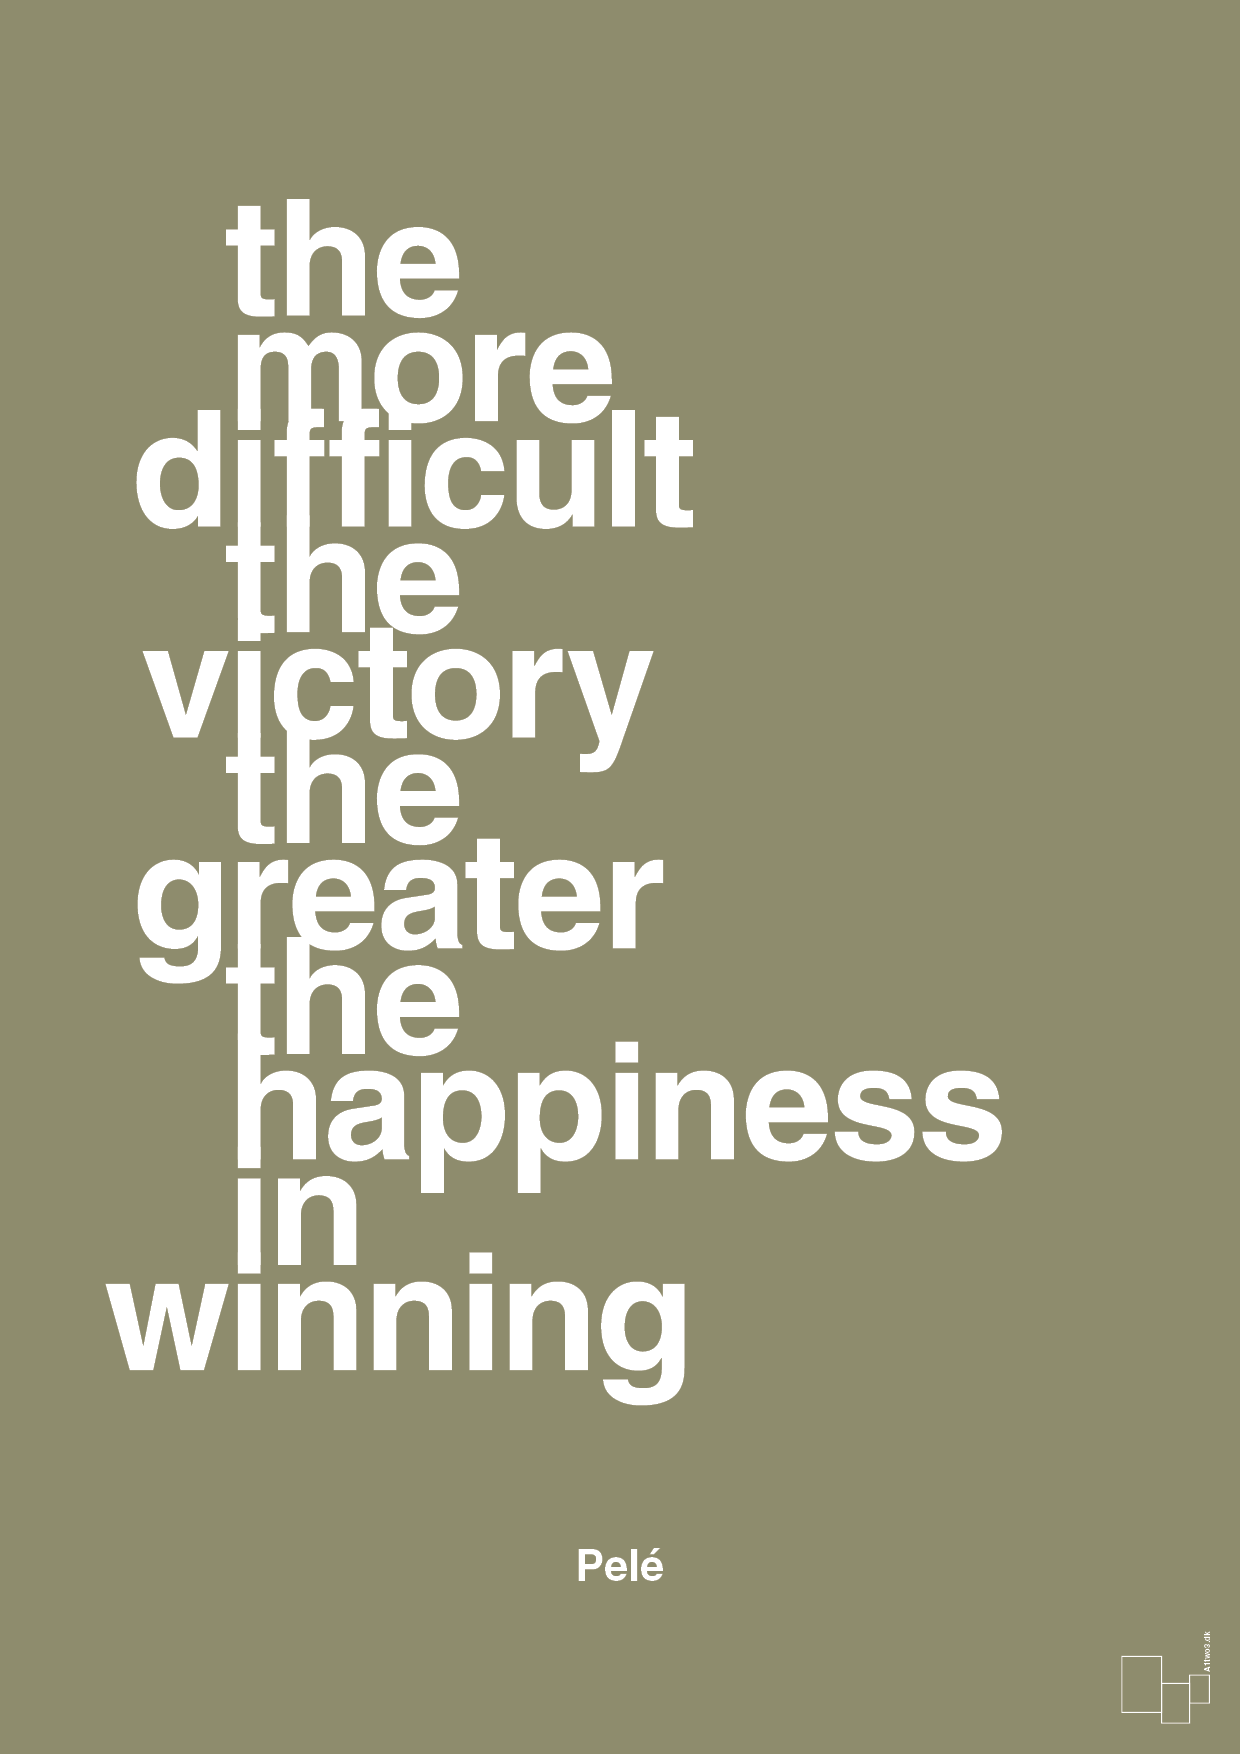 the more difficult the victory the greater the happiness in winning - Plakat med Citater i Misty Forrest